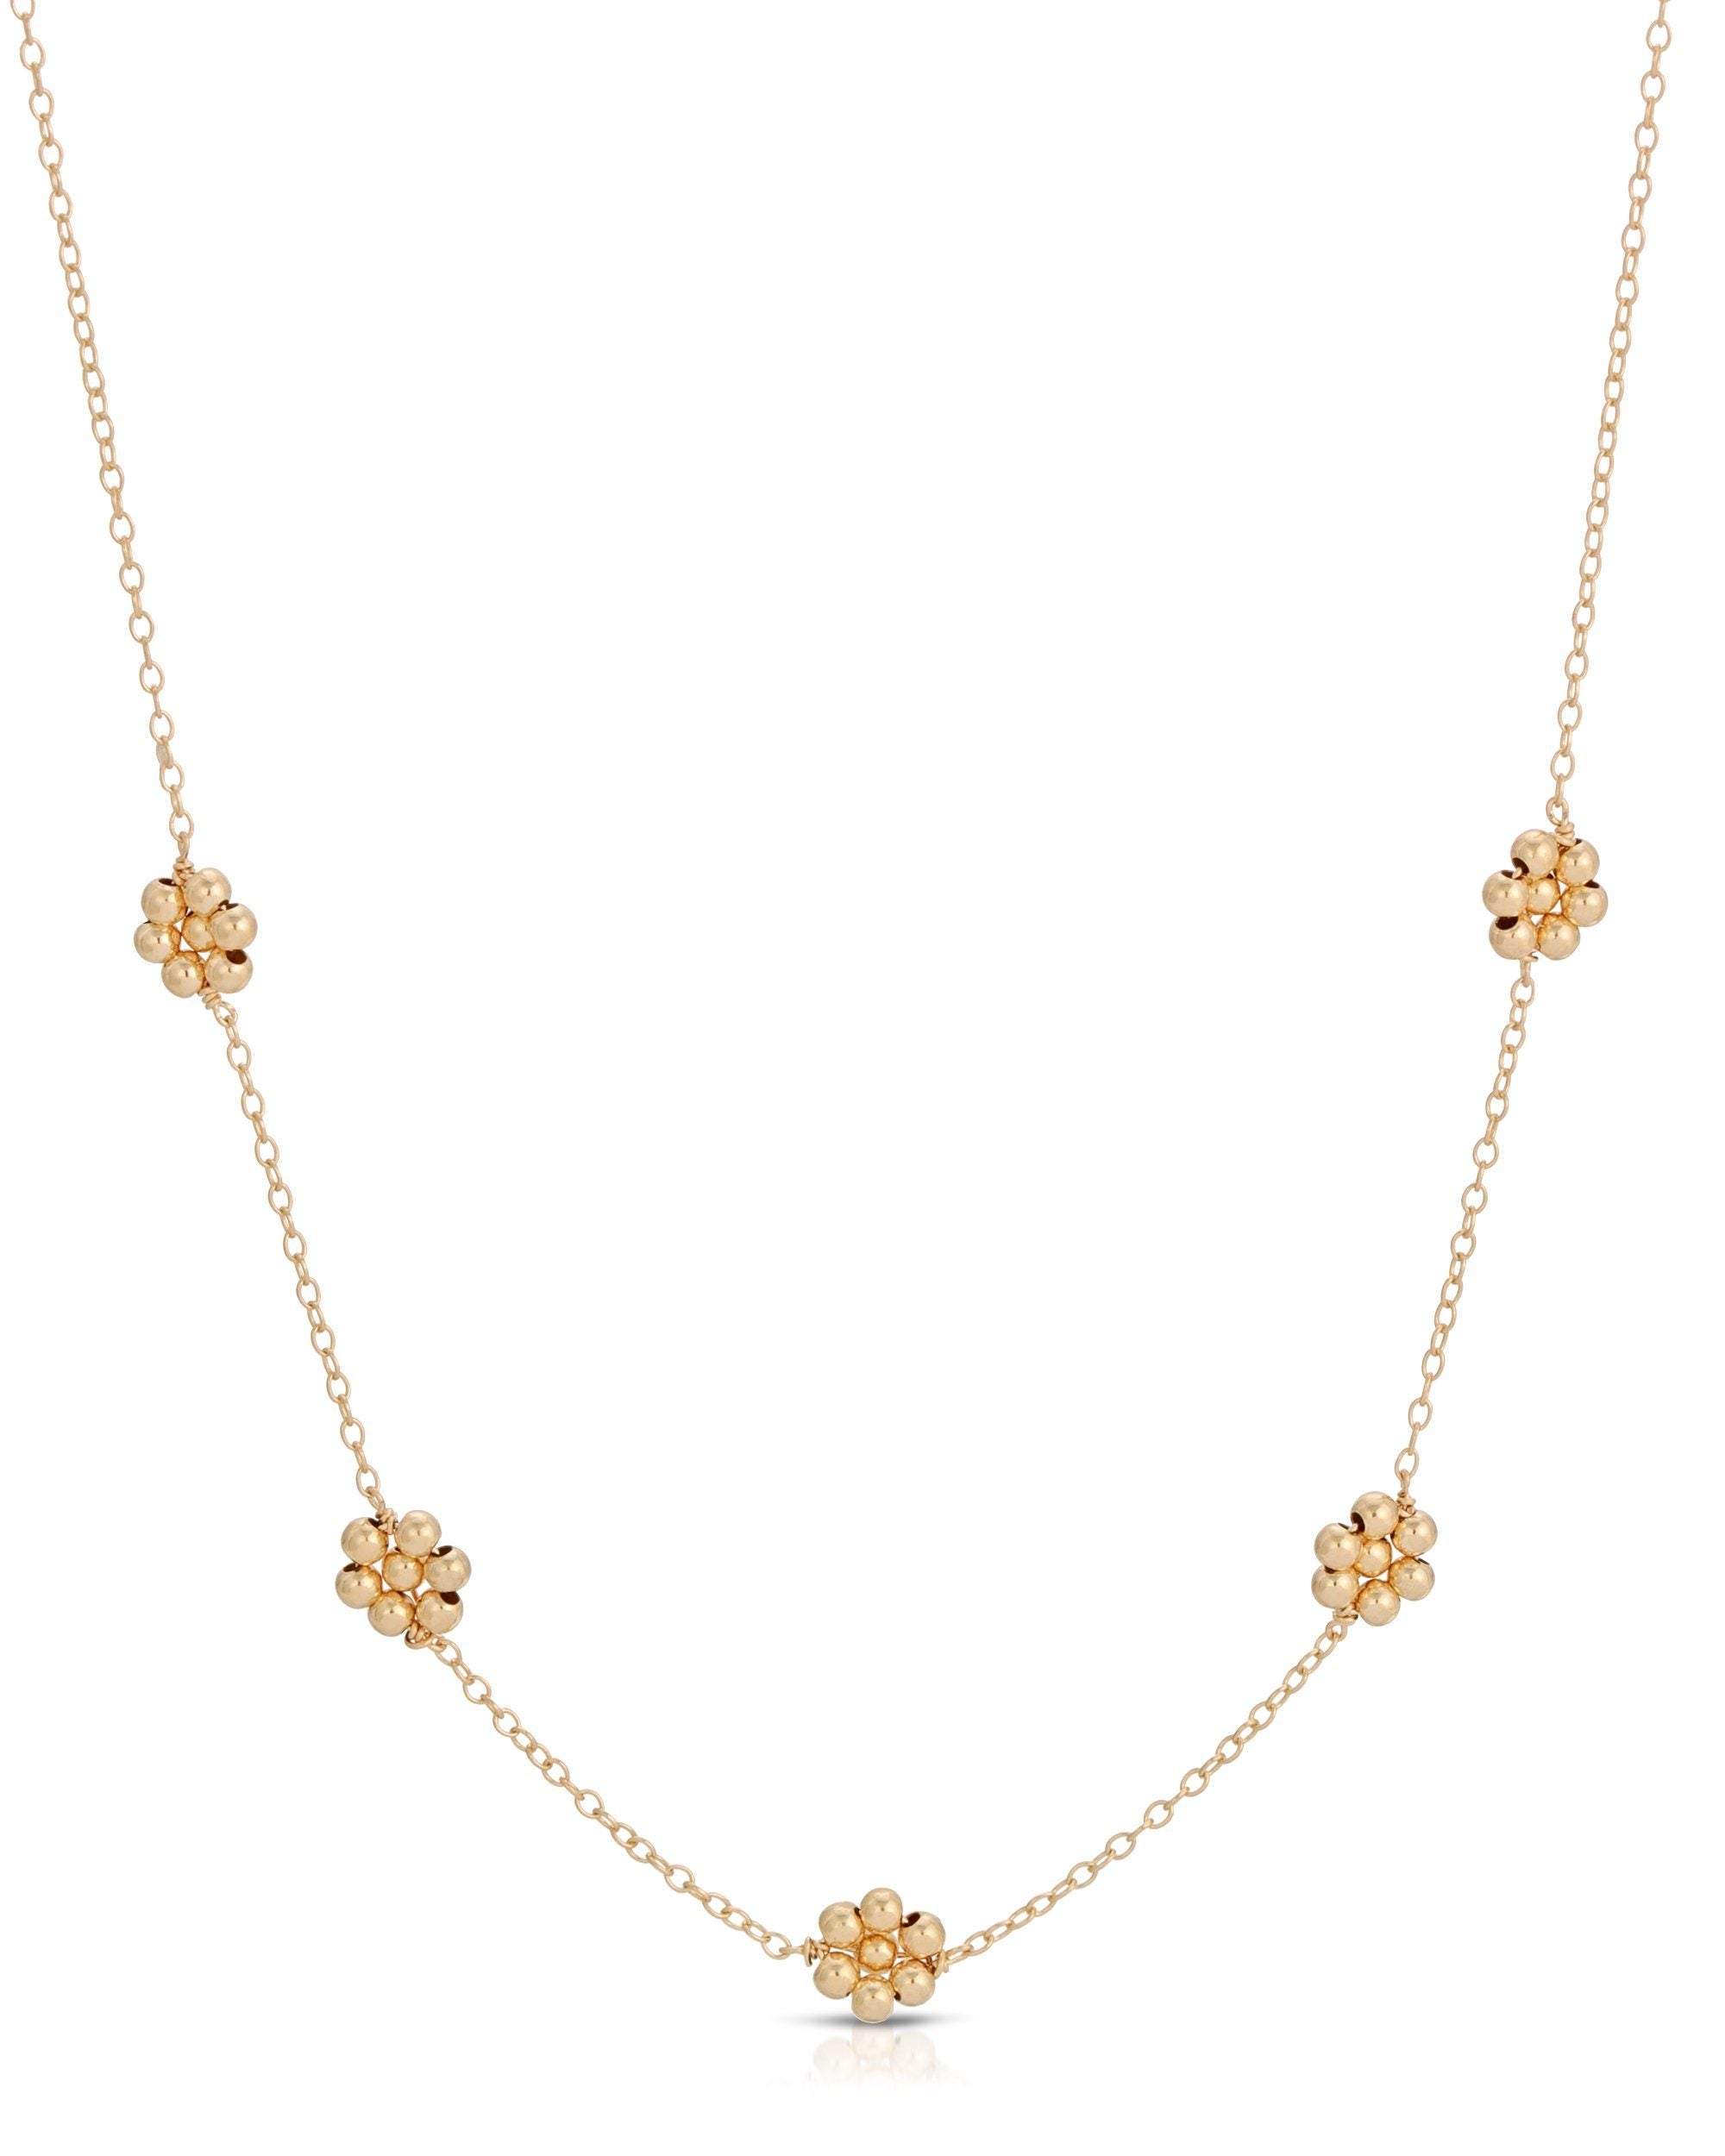 16 - 18KT Yellow Gold Filled Chain - Dainty Fine - 16 - 16 Inch